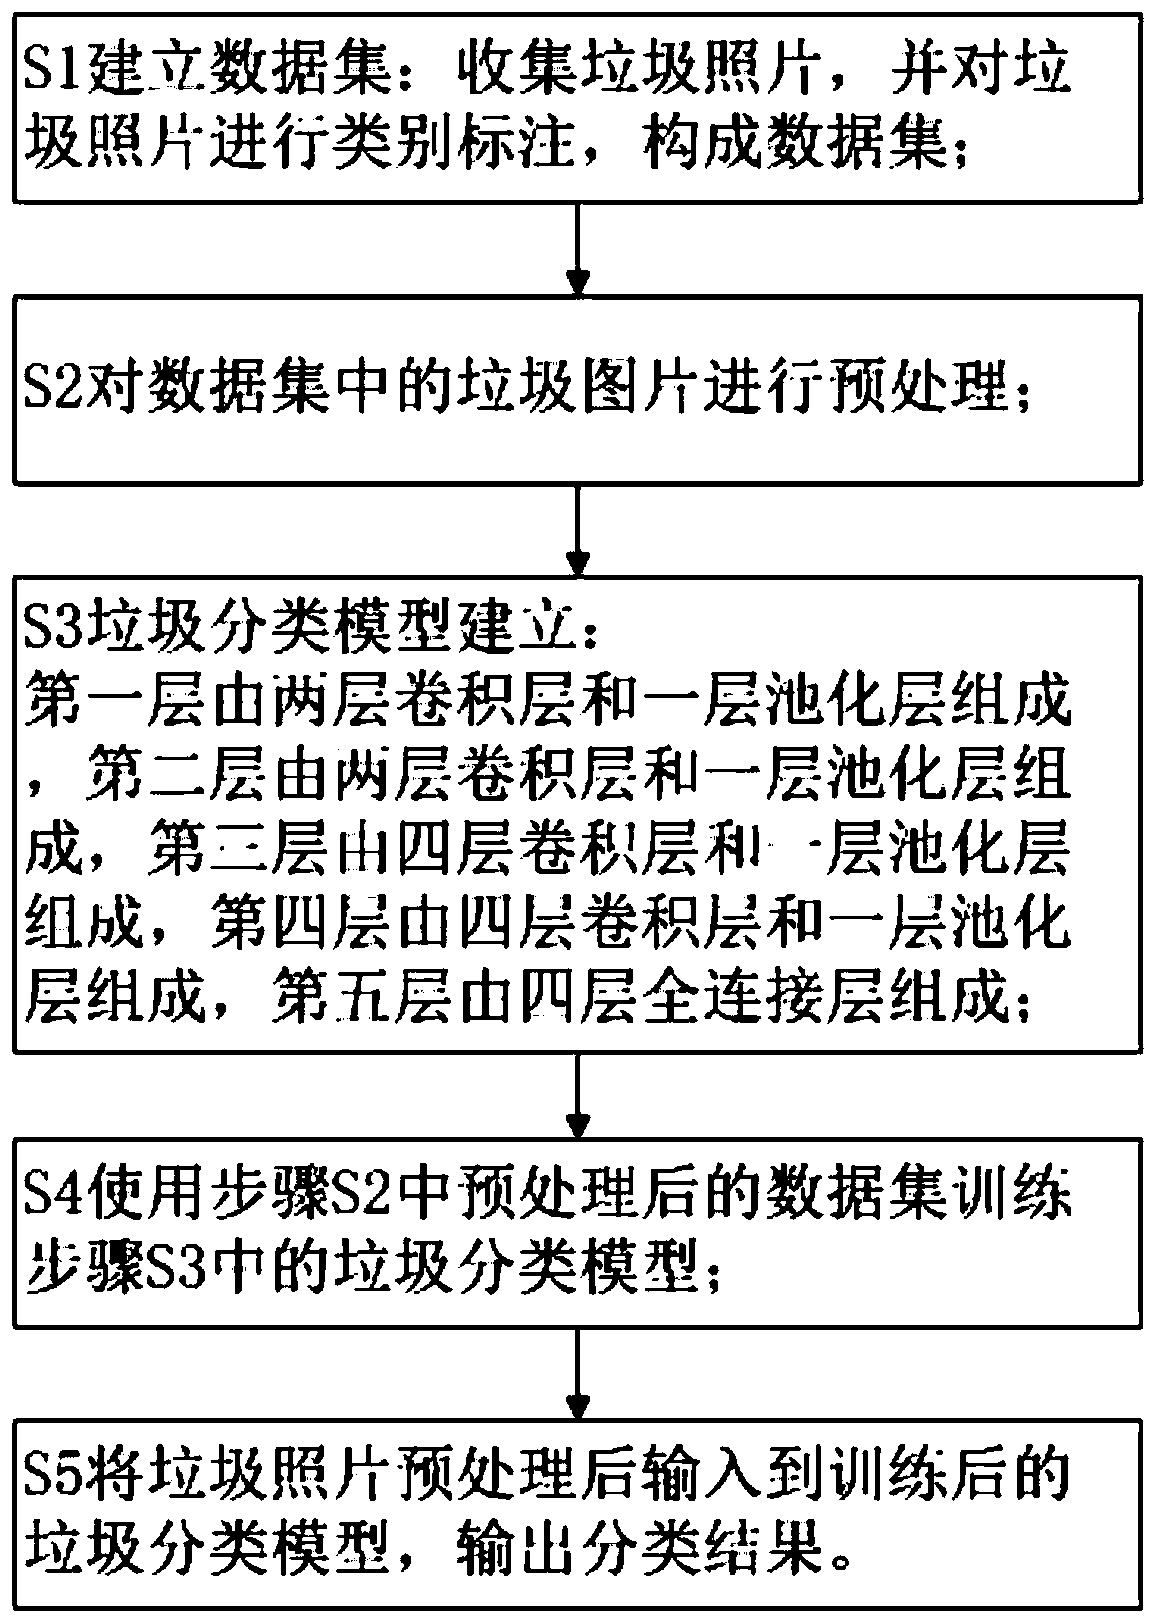 Garbage classification and recognition method based on artificial intelligence